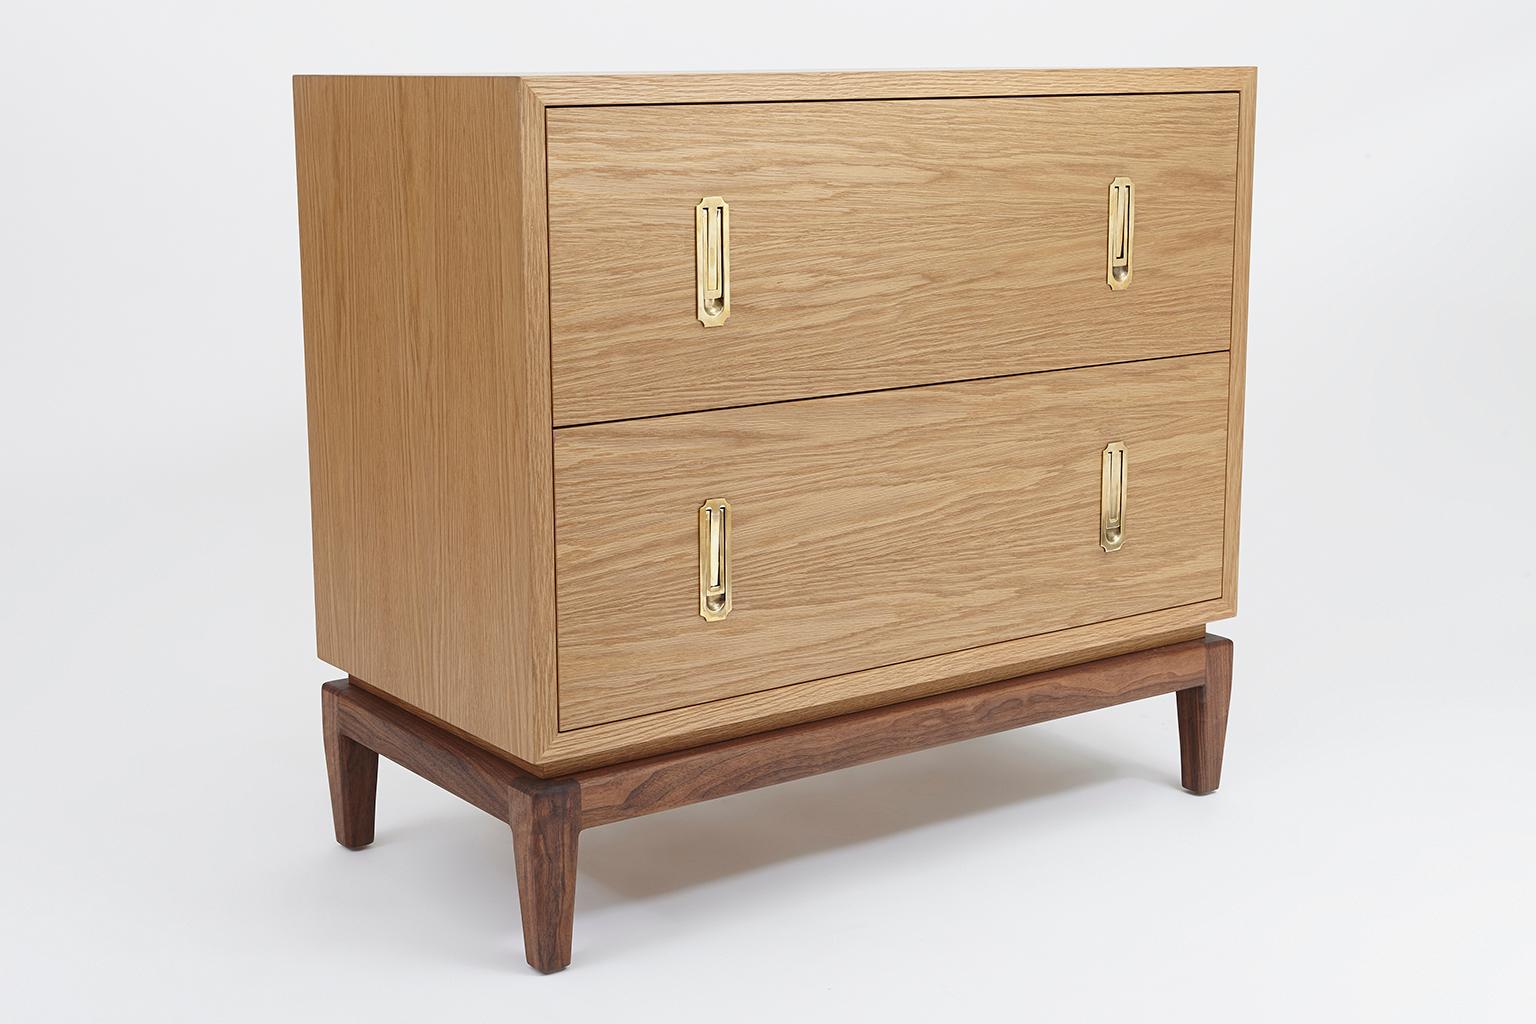 Oak 2-drawer Arcadia chest by Lawson-Fenning with walnut base. The 2-drawer Arcadia Chest features two drawers or two doors, cast brass hardware and a sculptural solid American walnut or white oak base. 

The Lawson-Fenning Collection is designed